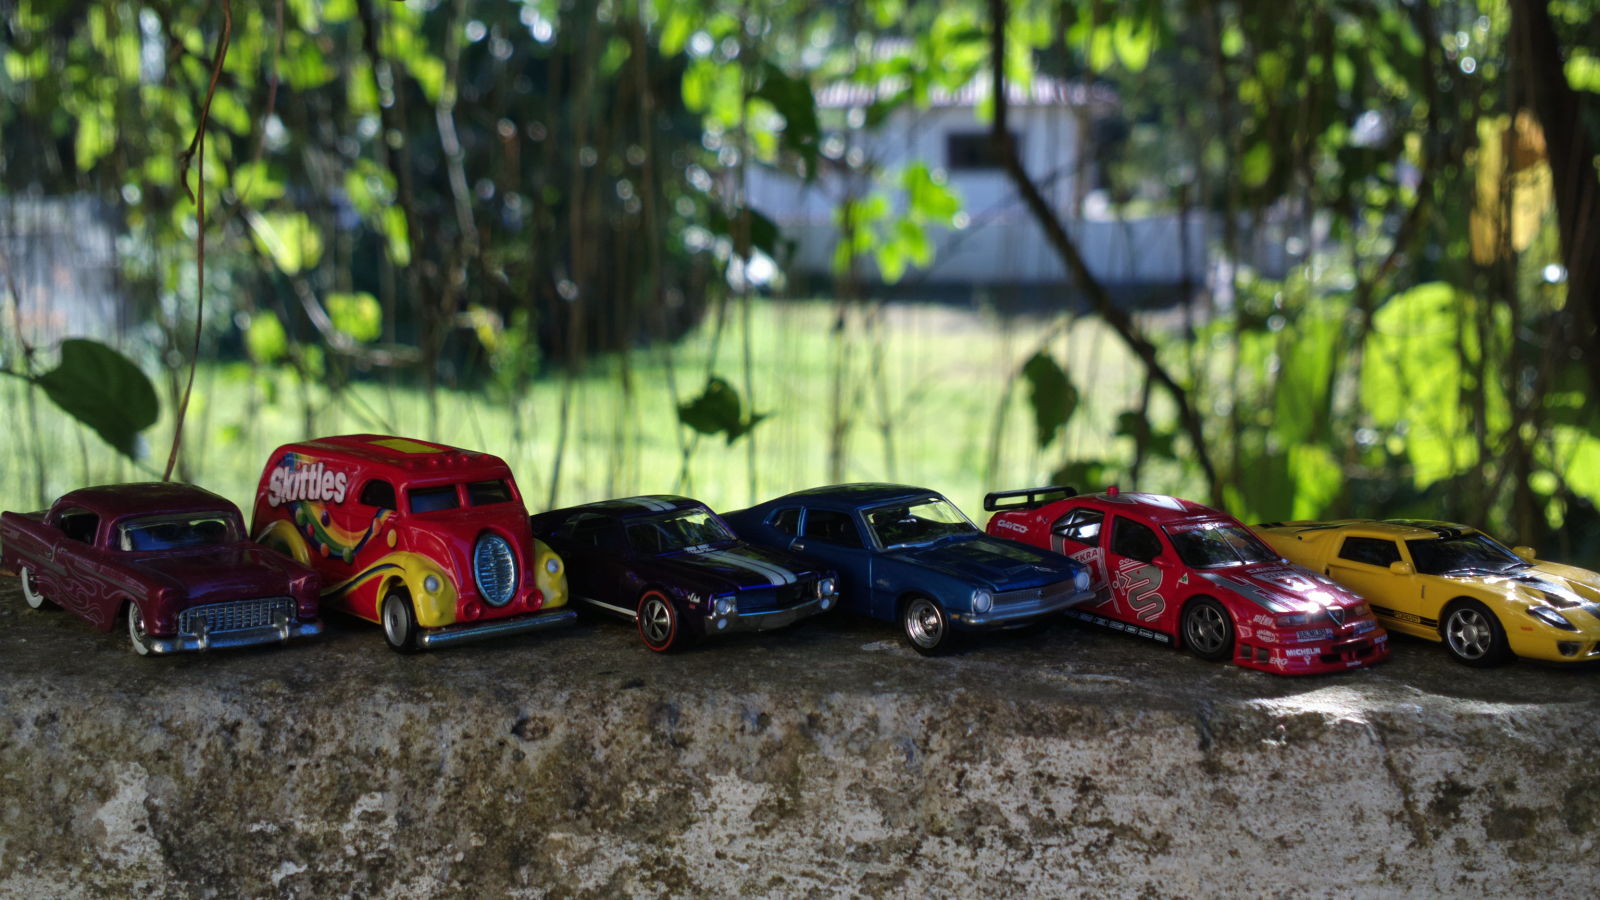 From left to right, a Super Treasure Hunt, a Popular Culture, a RLC-Exclusive, a Johnny Lightning, a Kyosho and an AutoArt